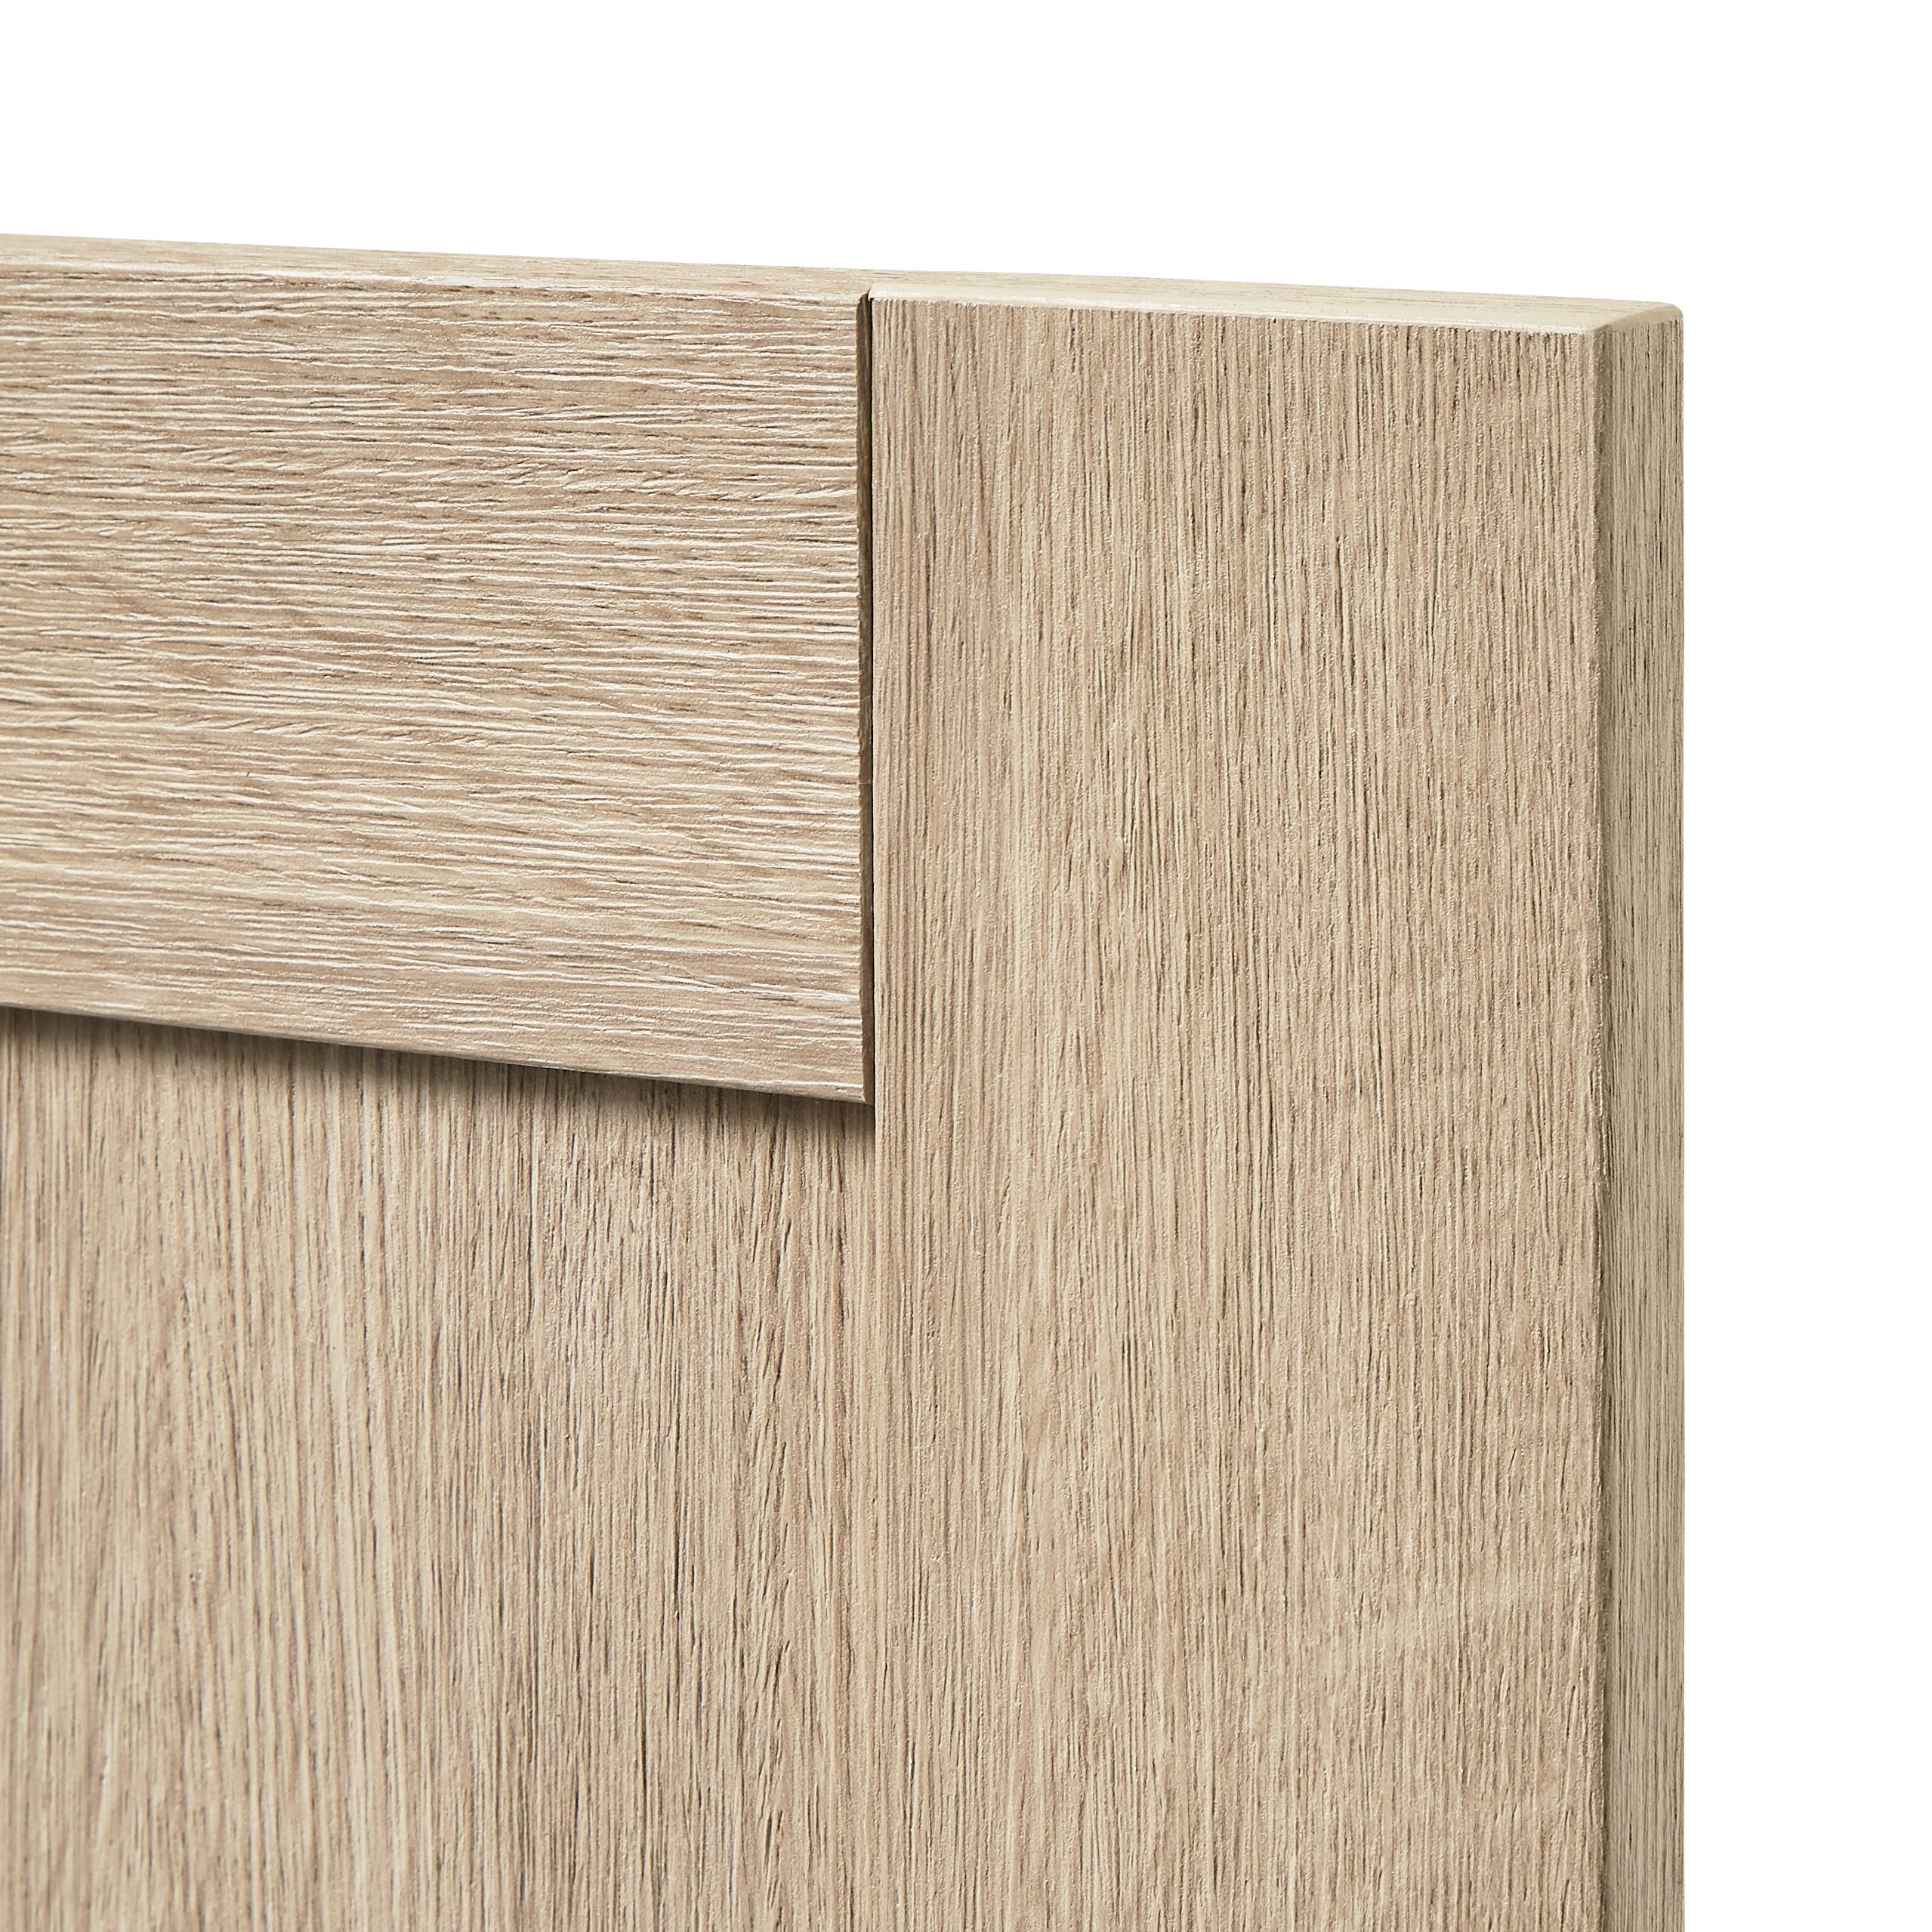 GoodHome Alpinia Oak effect shaker Drawer front (W)400mm, Pack of 4